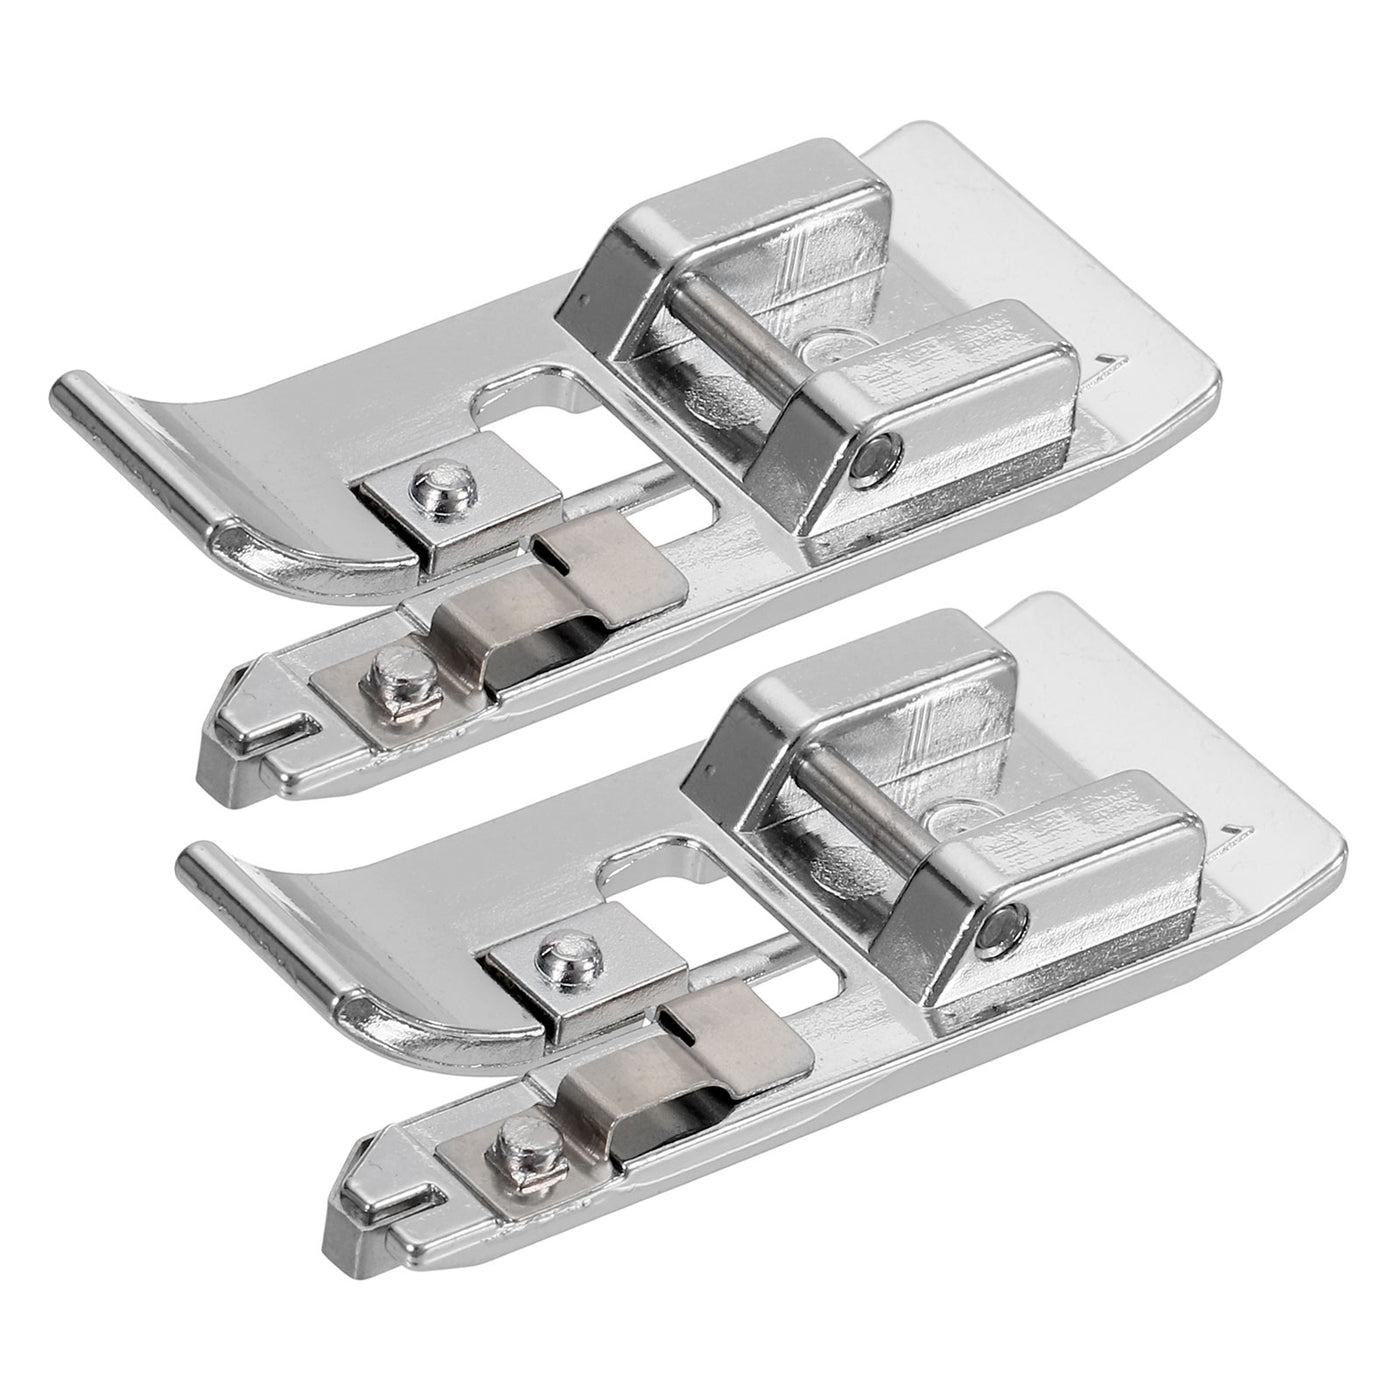 uxcell Uxcell Overcast Foot Sewing Foot Galvanized Iron Presser Feet